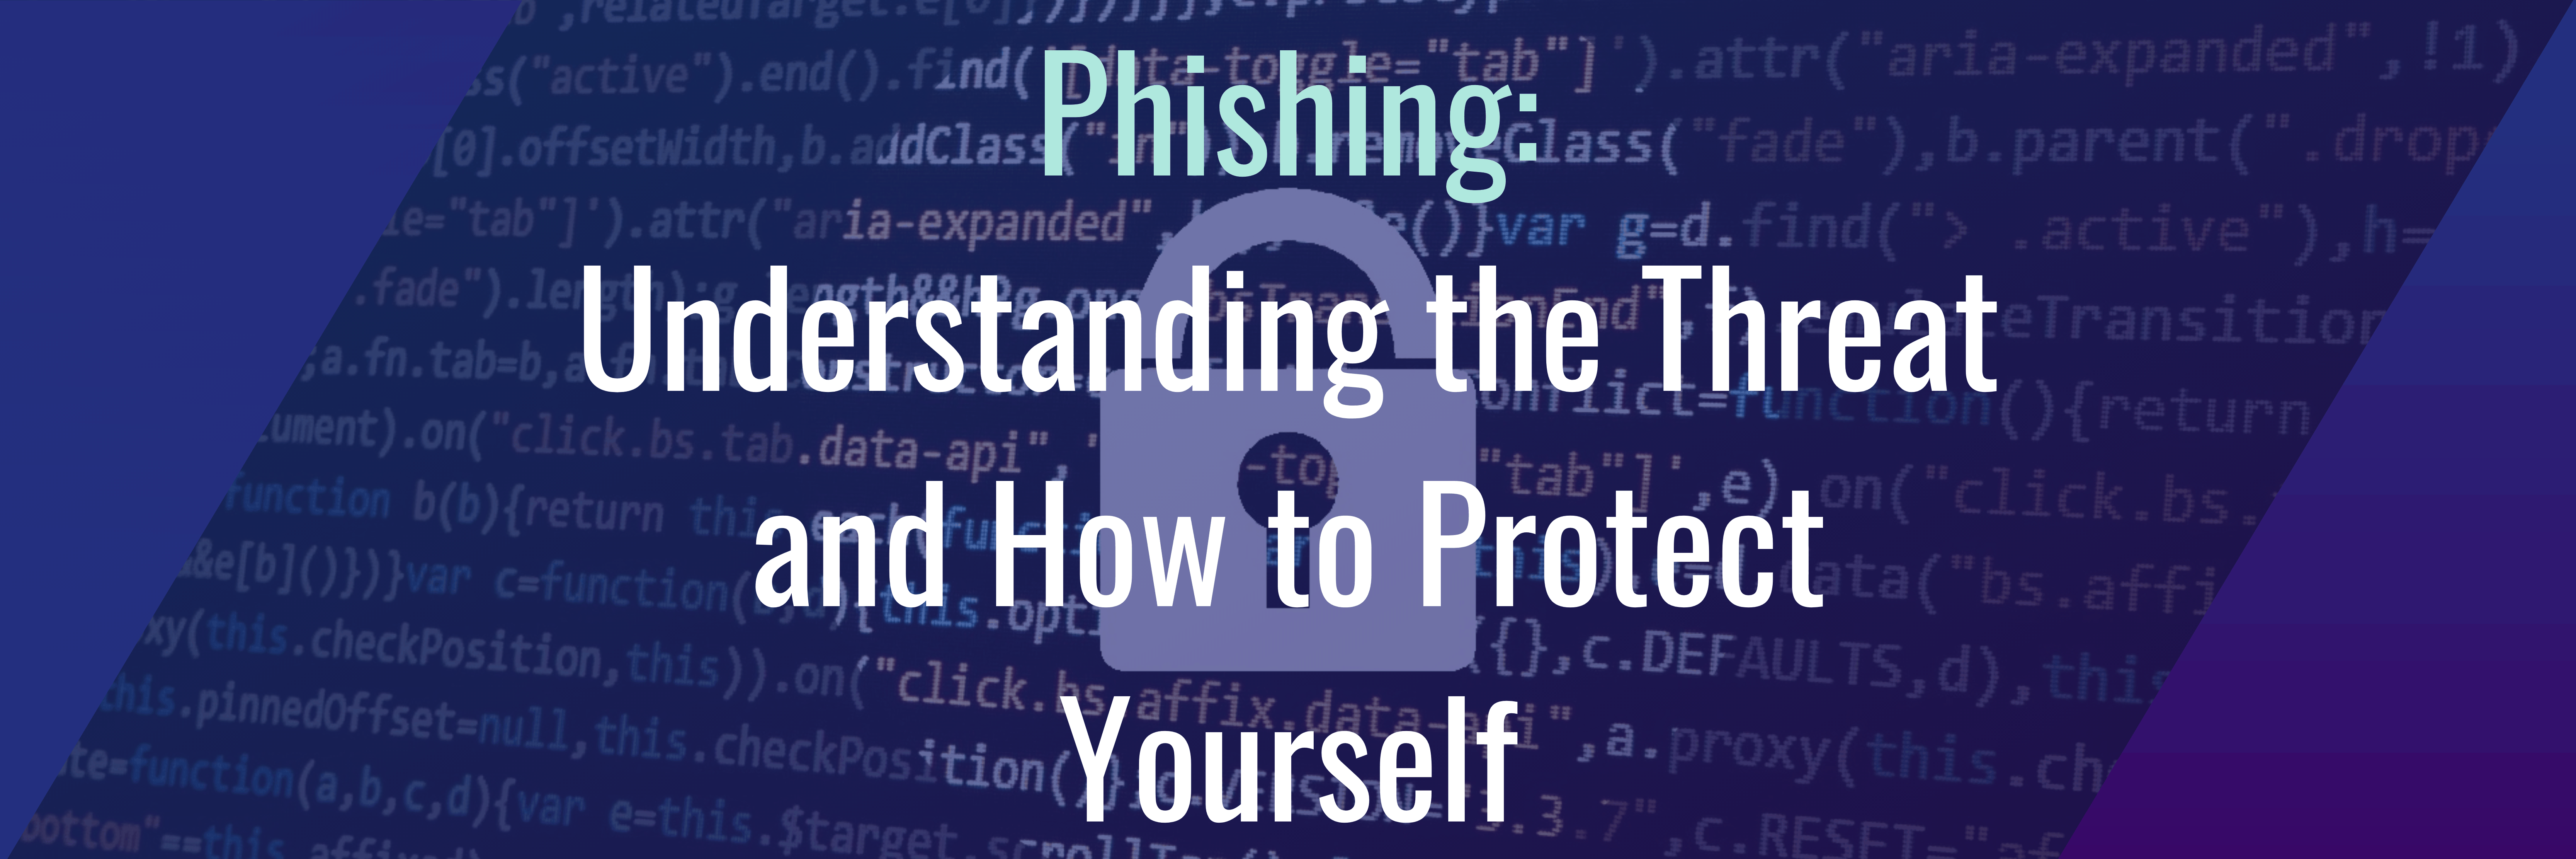 Phishing: Understanding the Threat and How to Protect Yourself 